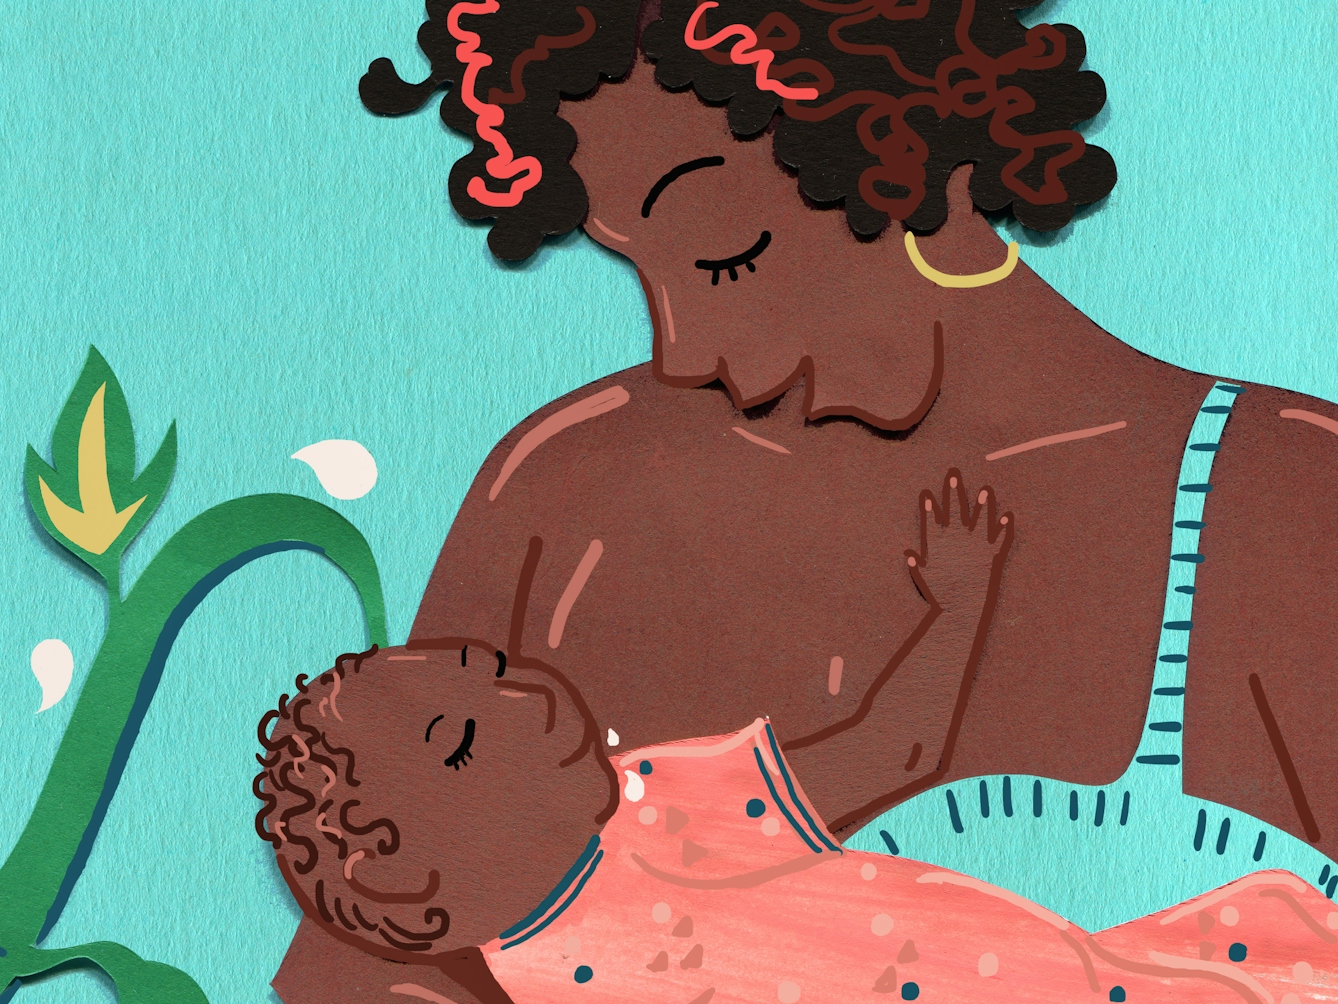 A mixed media illustration depicting a black mother breastfeeding a child. To the left there are green vines with patterned leaves and milk droplets in the background.